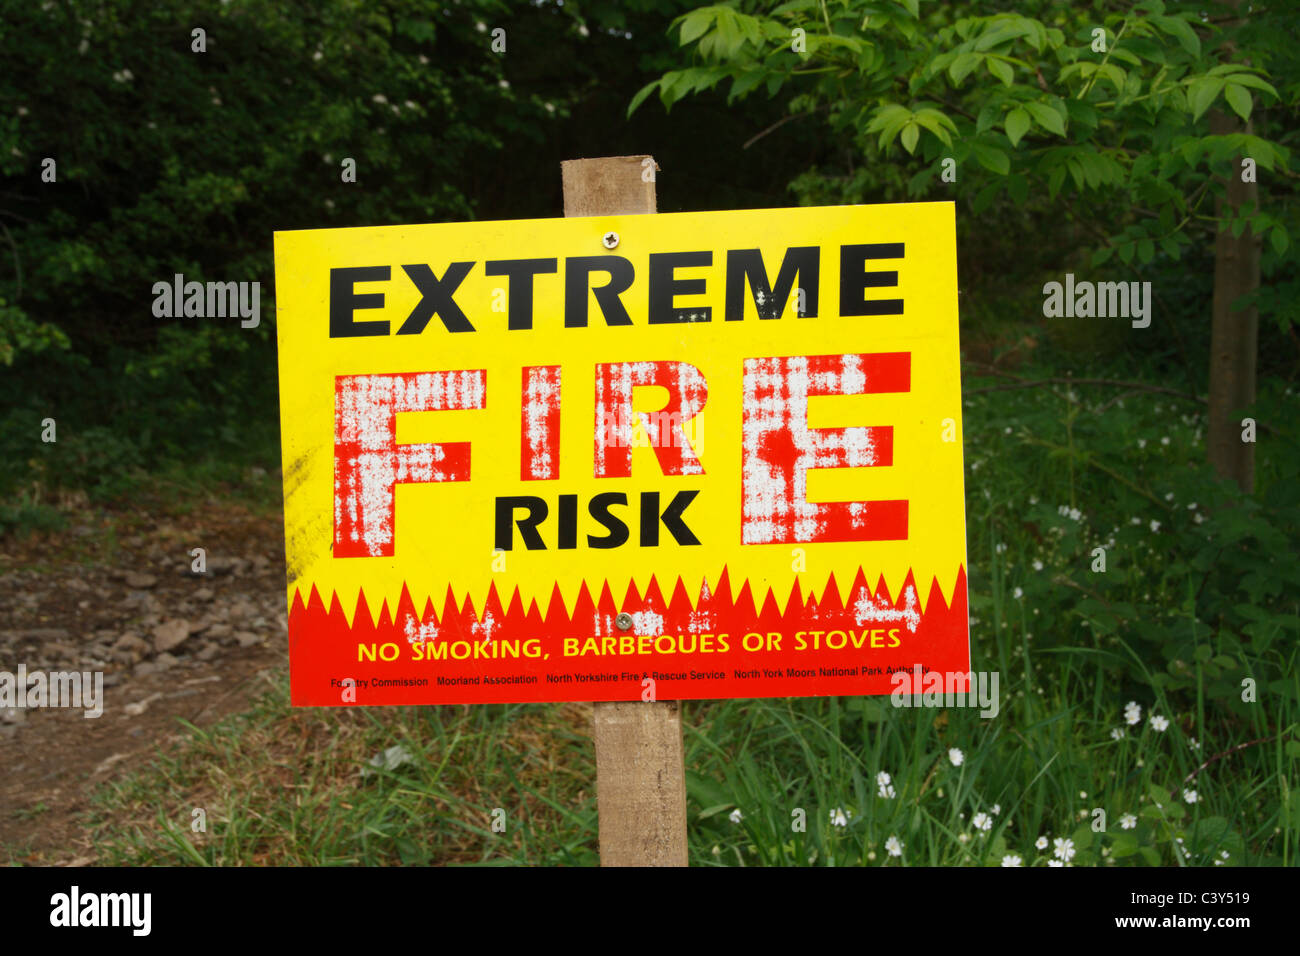 Extreme fire risk sign. North Yorkshire Moors national park. England, UK Stock Photo